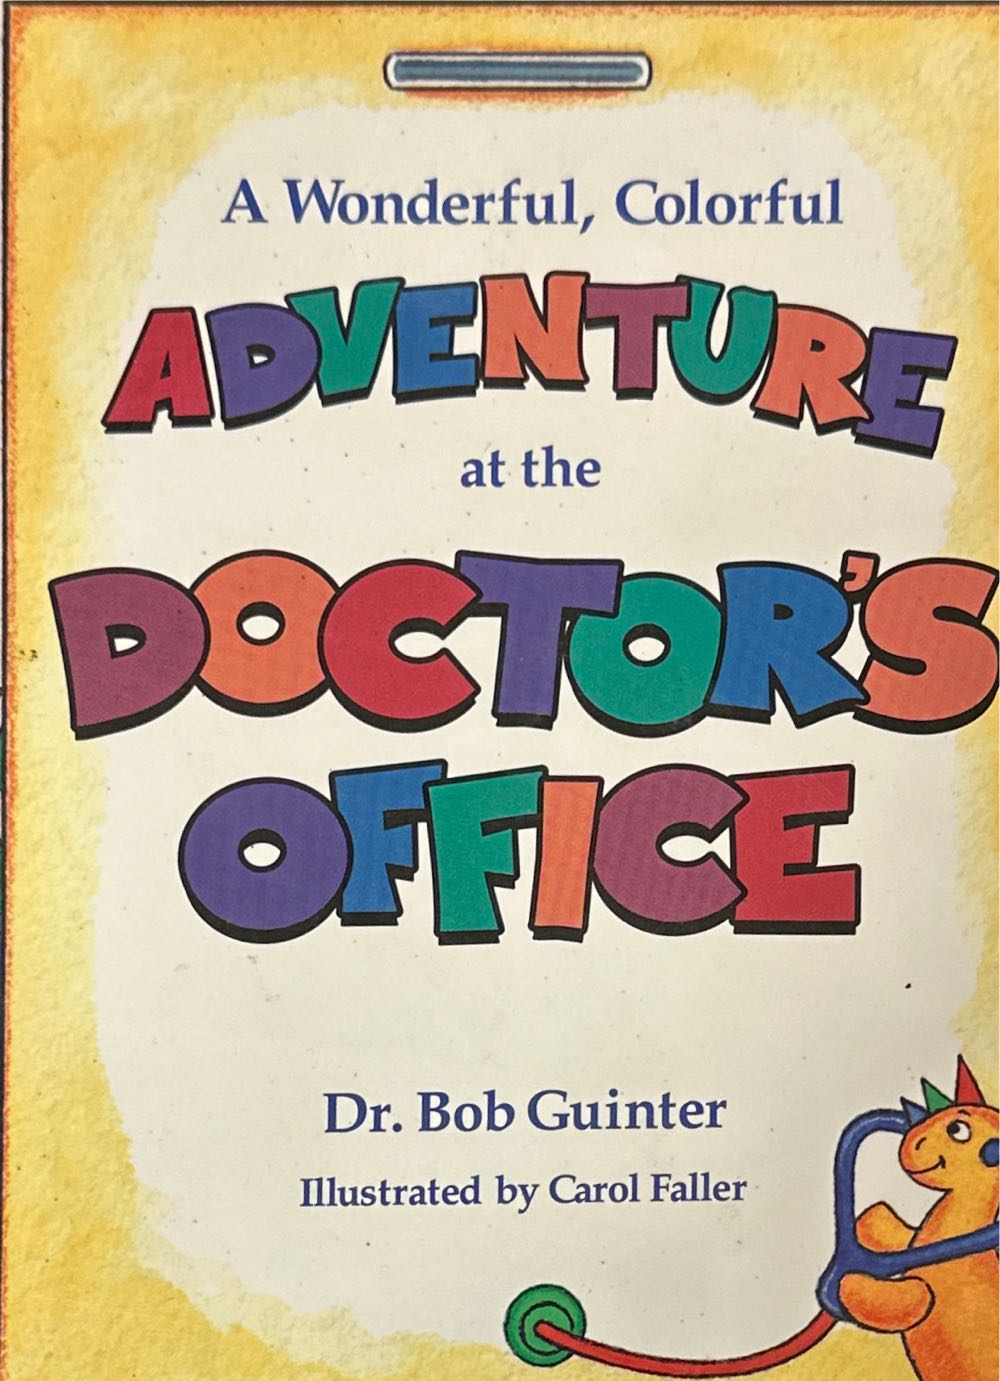 A Wonderful, Colorful Adventure at the Doctor’s Office - Bob Guinter (FamilyFinds) book collectible [Barcode 9781890651077] - Main Image 1